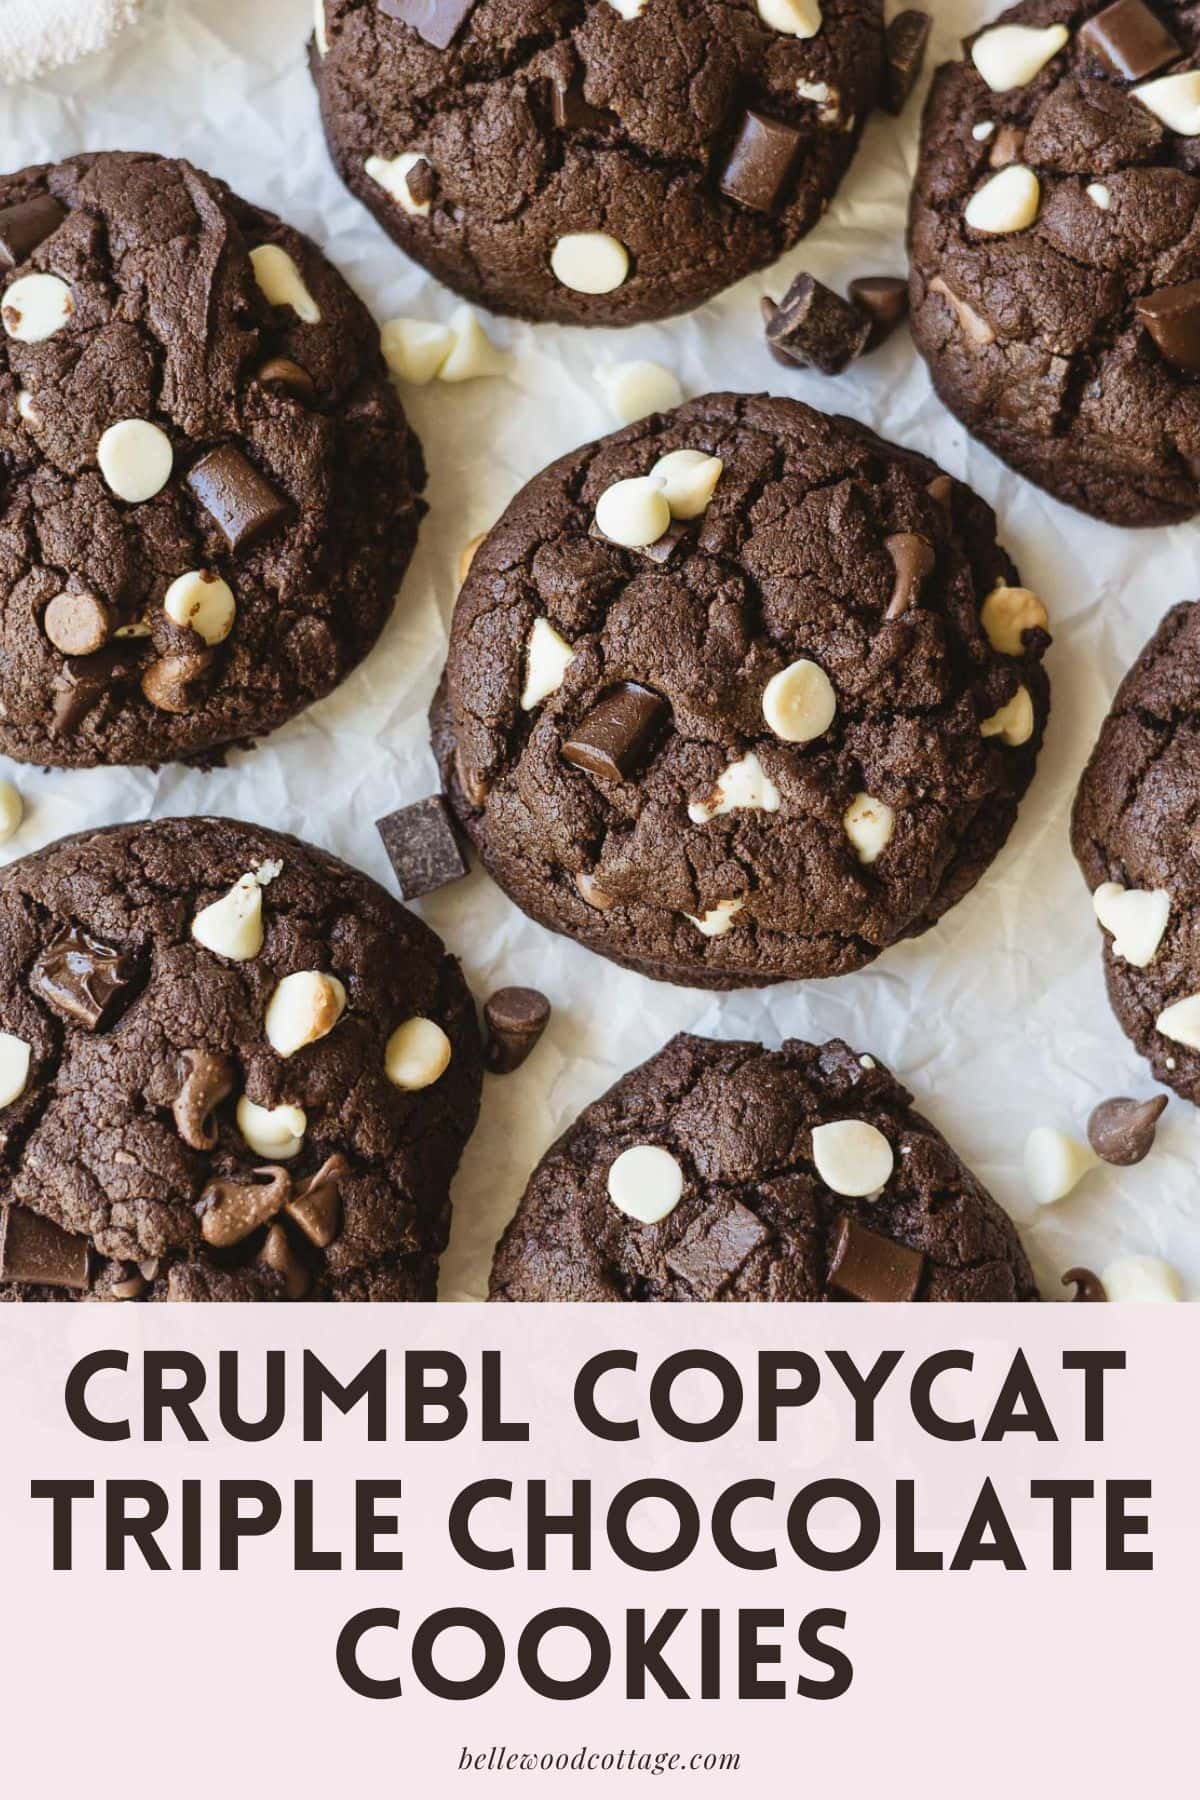 Chocolate cookies arranged on parchment with the words, "Crumbl Copycat Triple Chocolate Cookies"